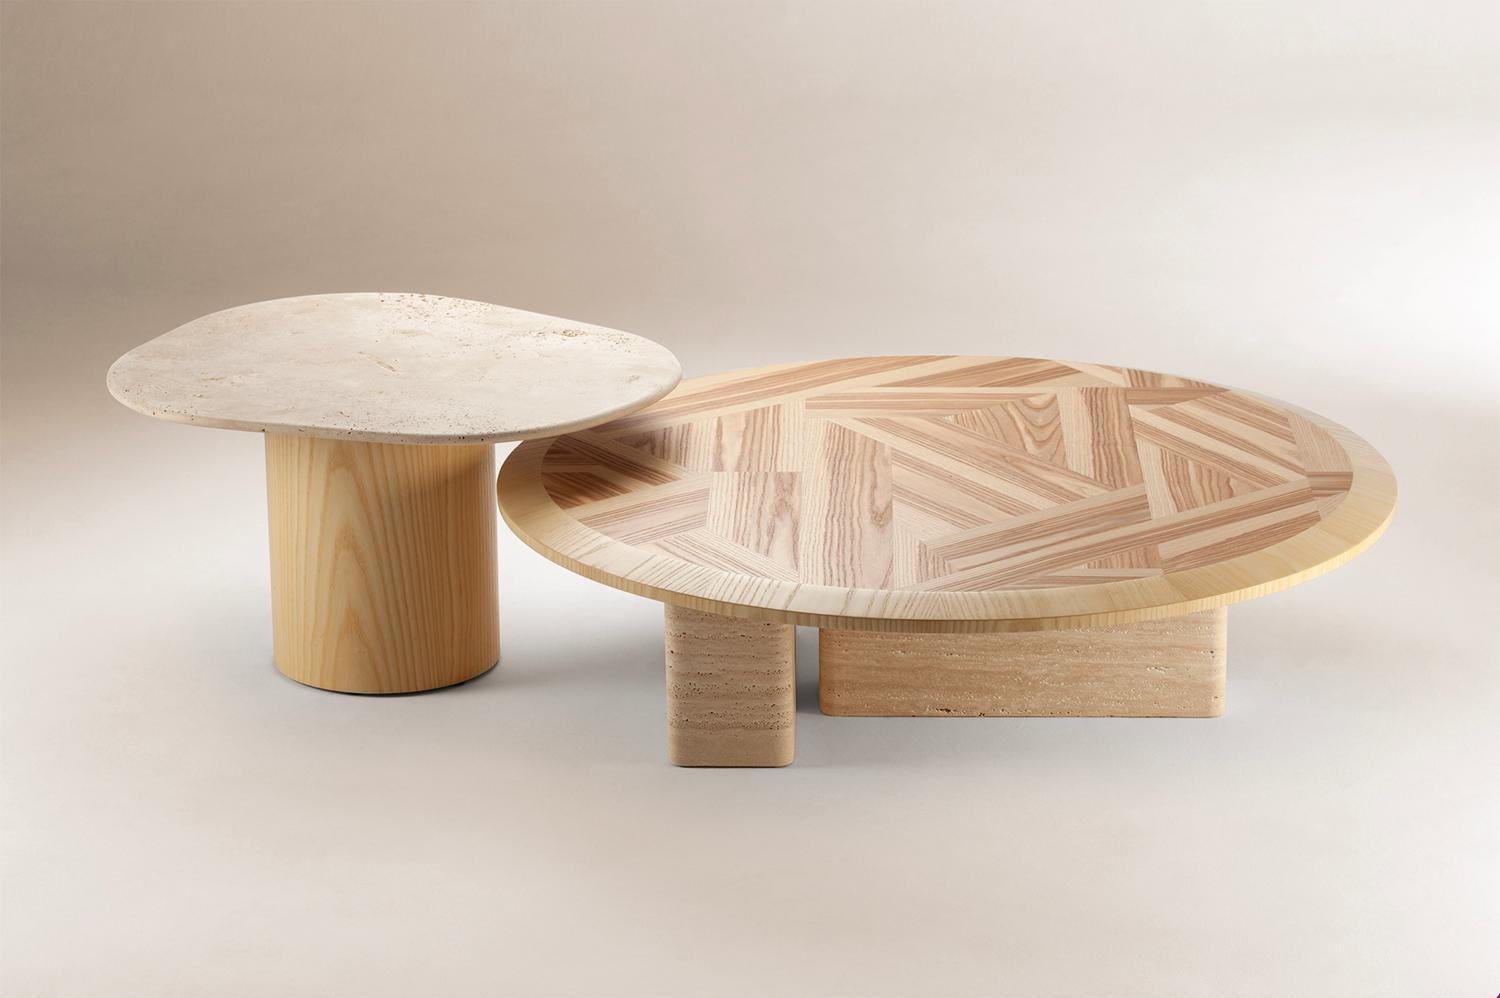 Scandinavian Modern DOOQ Organic Modern Travertine and Olive Ash Portuguese Tables L'anamour For Sale